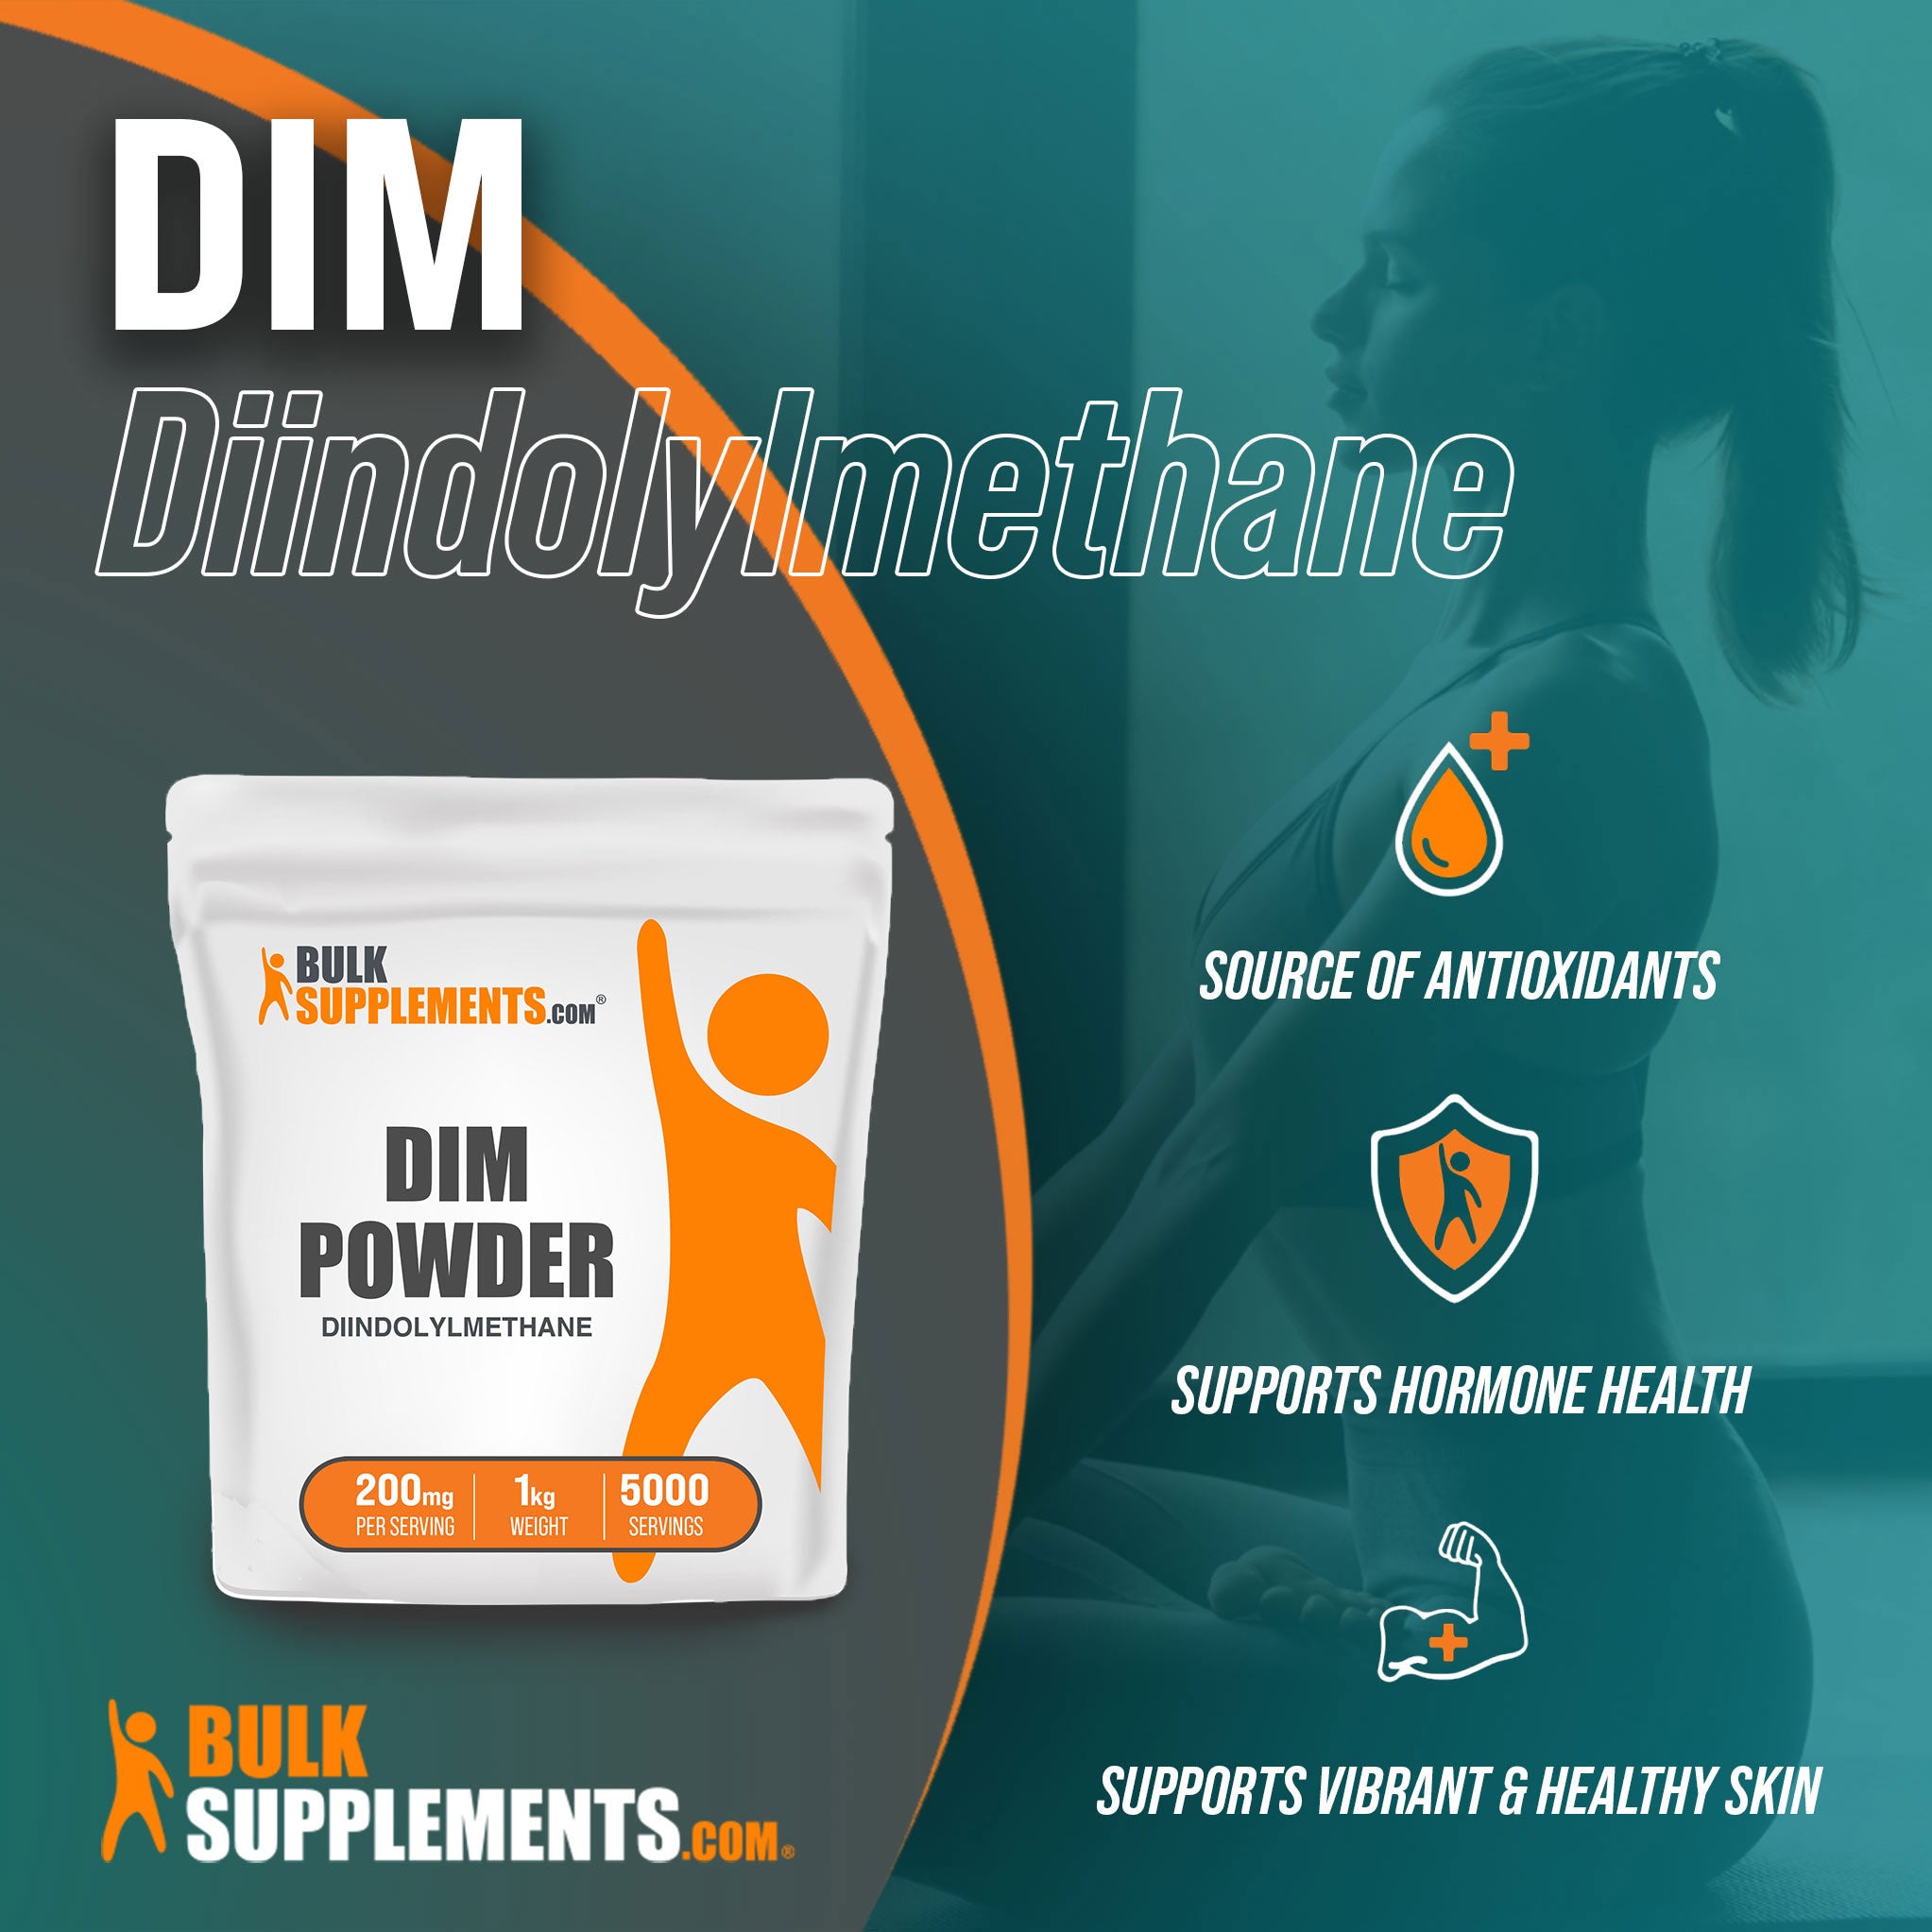 Benefits of DIM (Diindolylmethane); source of antioxidants, supports hormone health, supports vibrant & healthy skin